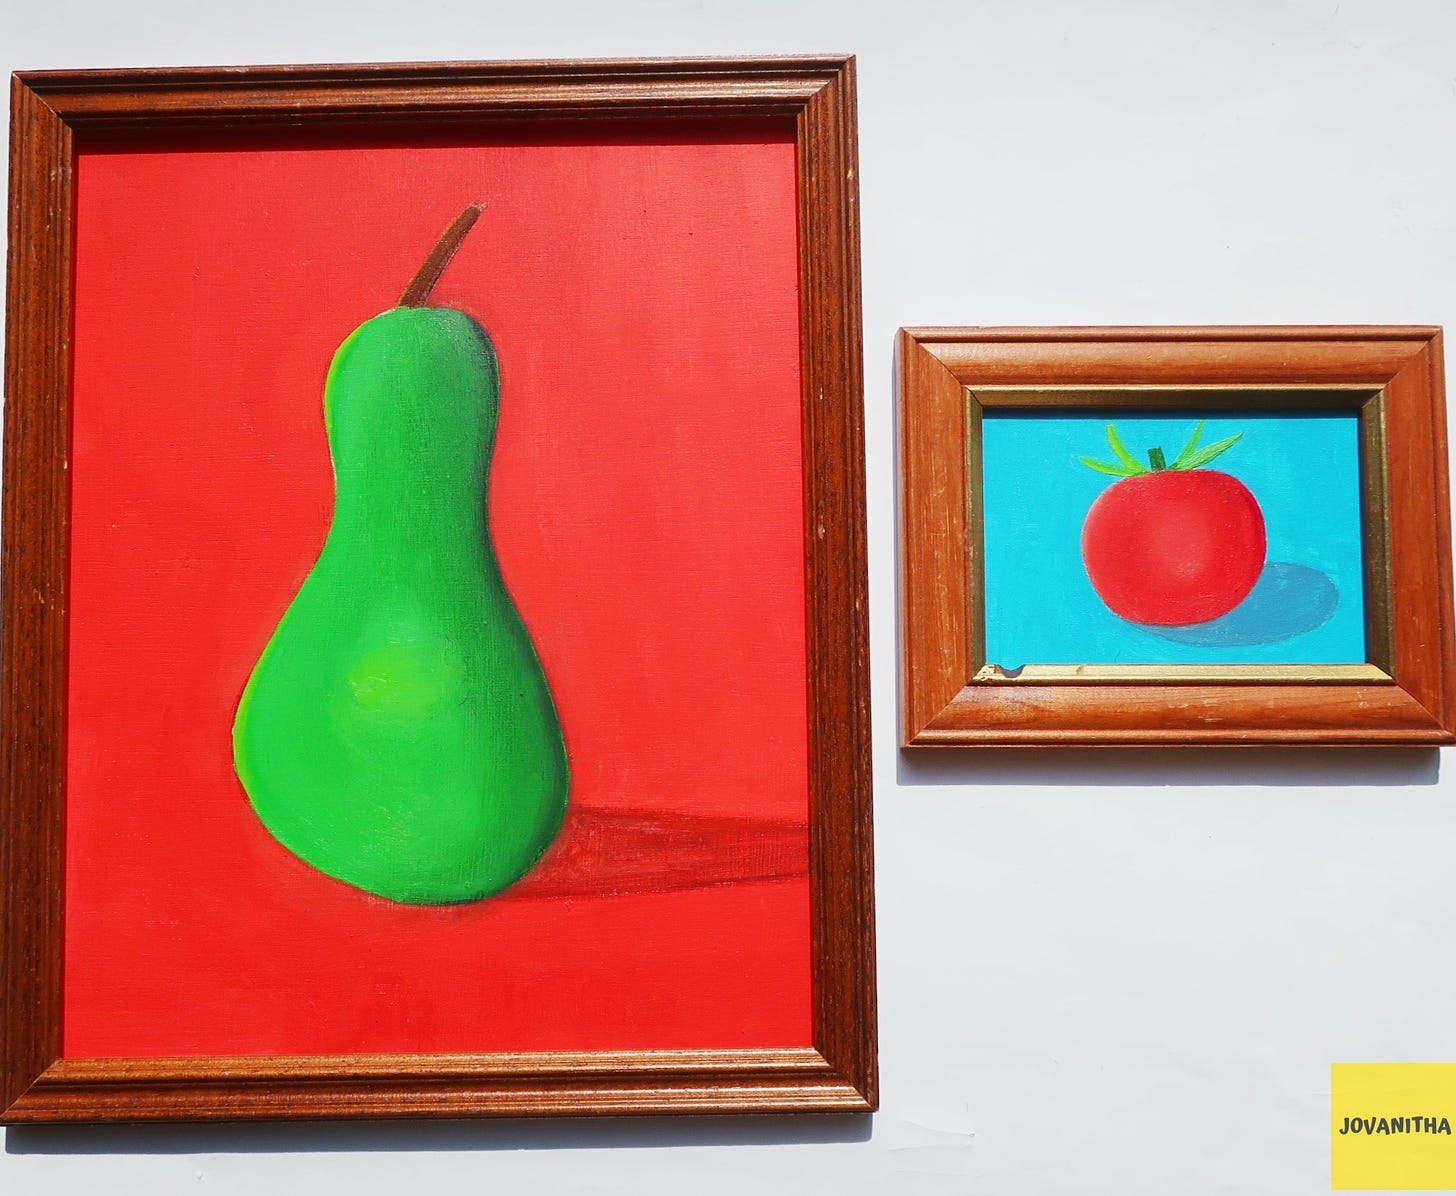 A green pear on a red background and a red tomato on a blue background in thrifted frames